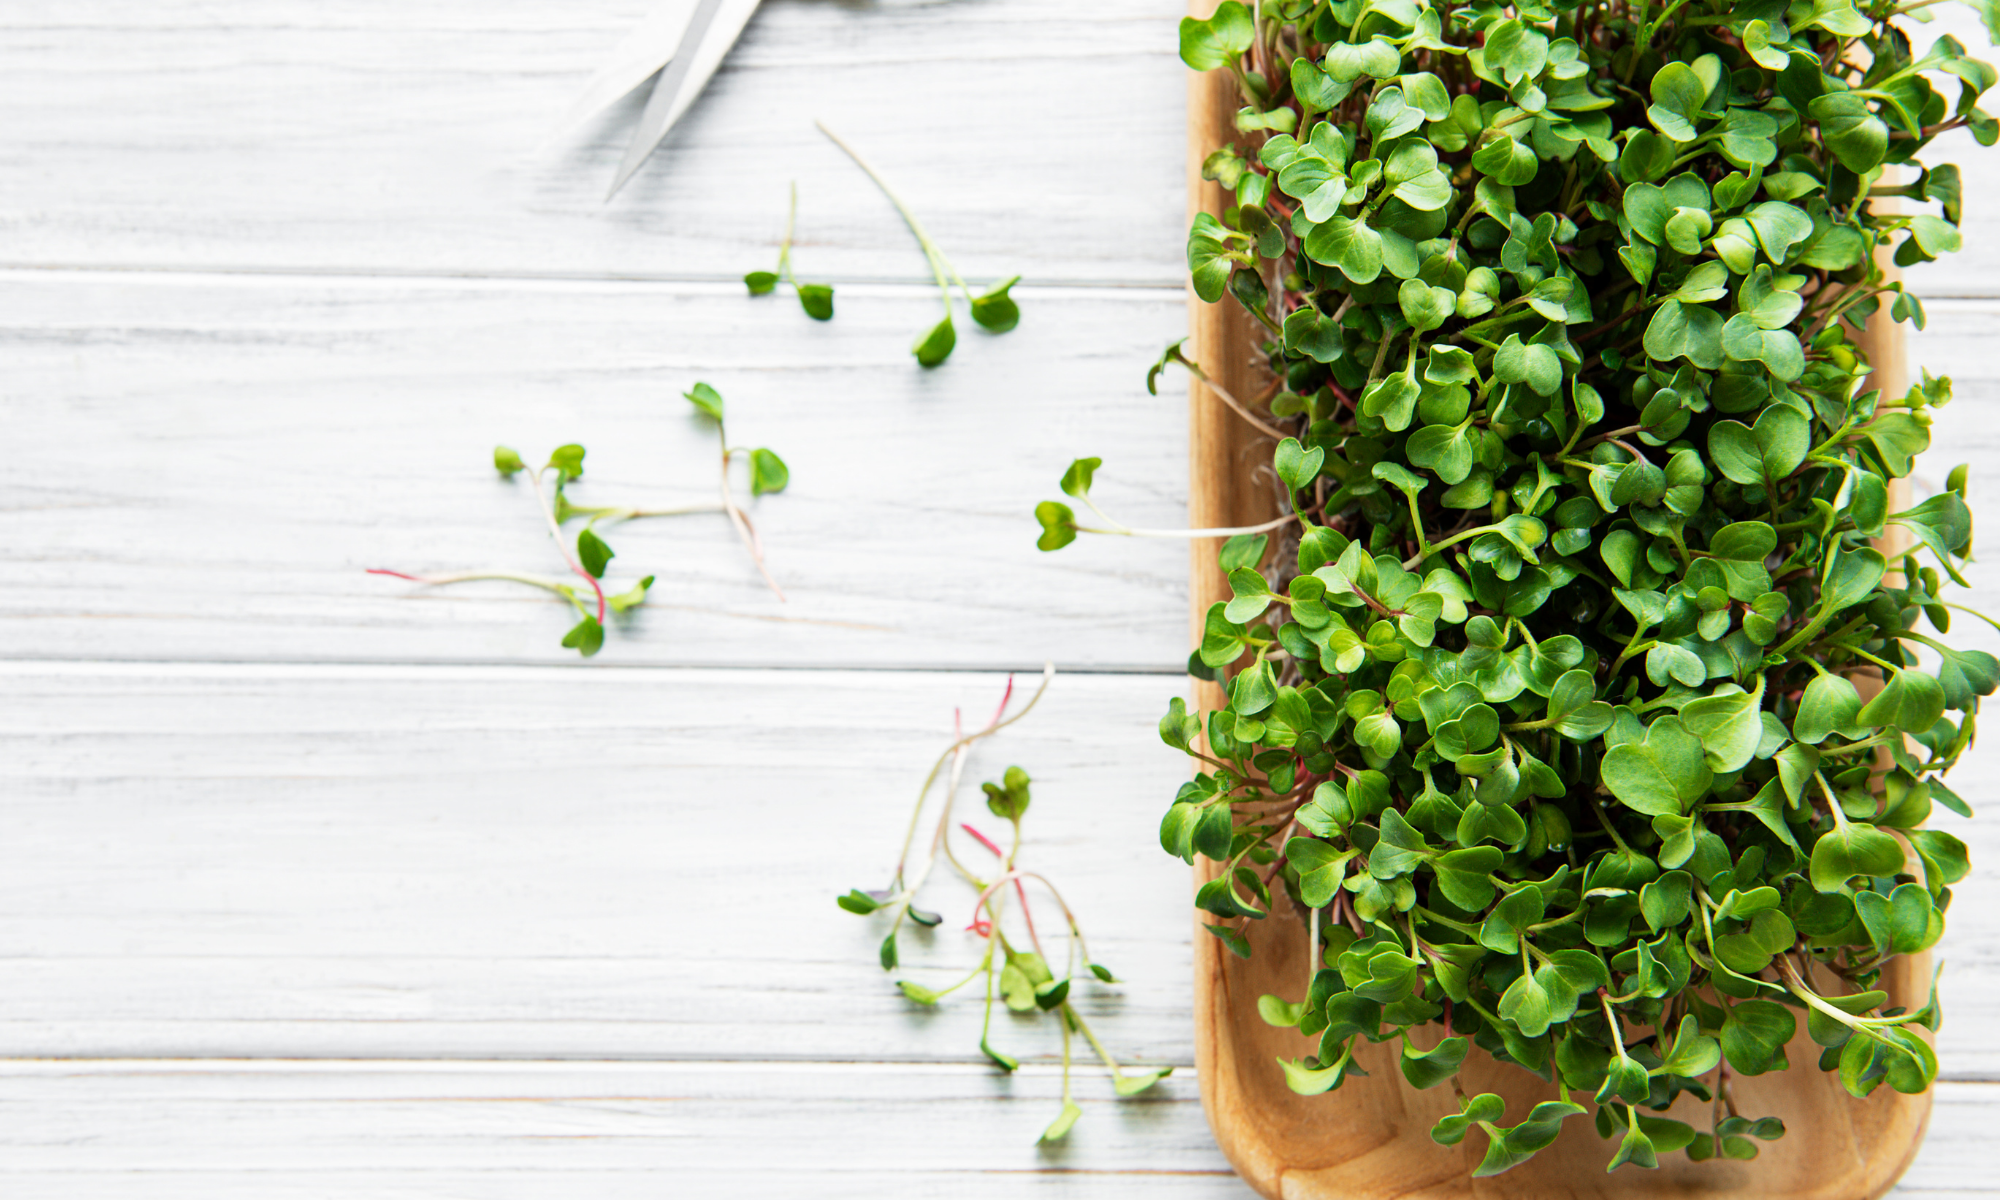 Growing and Harvesting Microgreens at Home